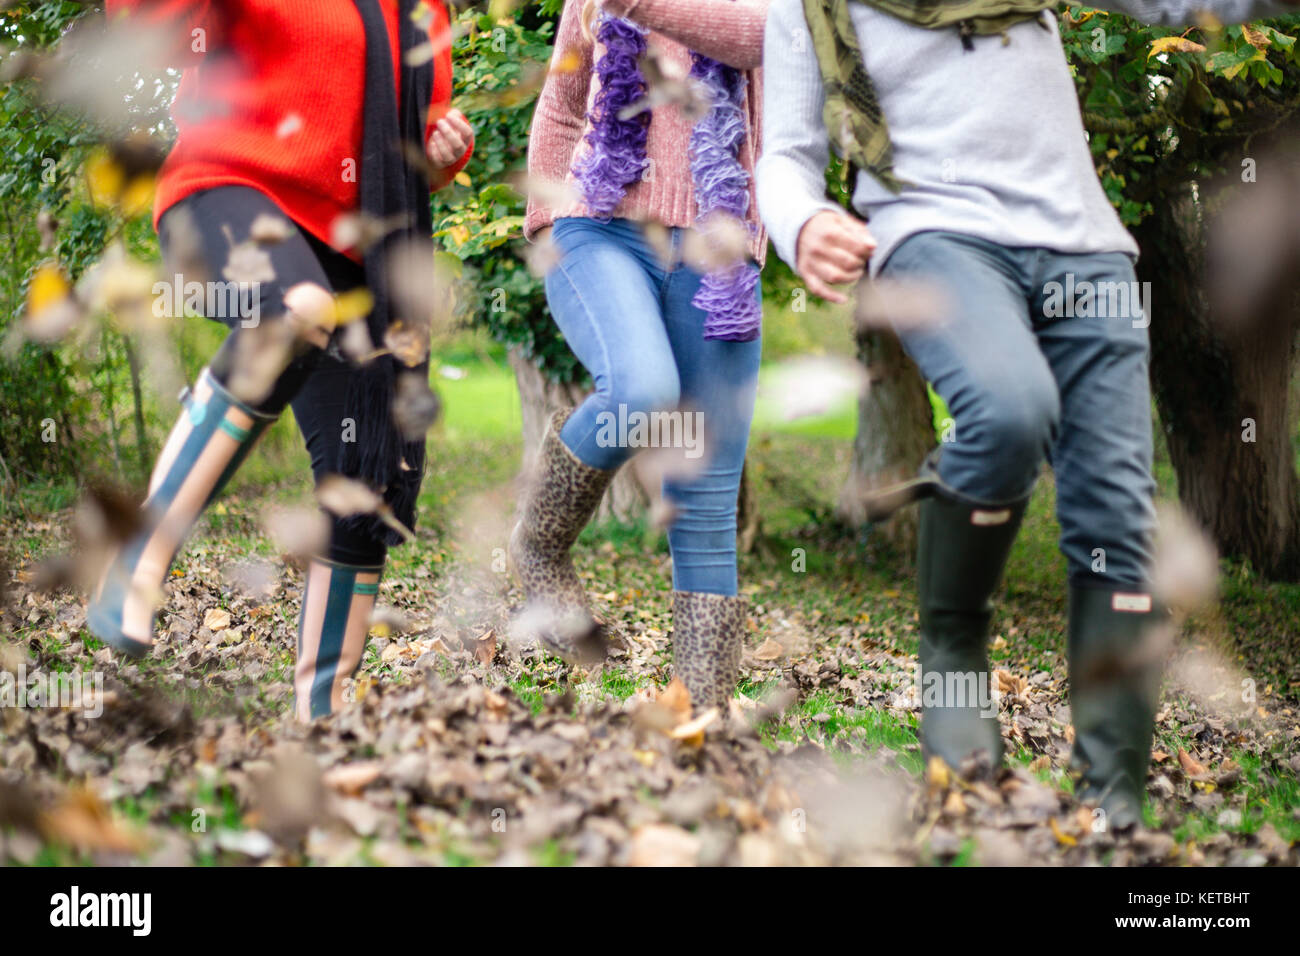 three people kicking leaves in woodland / park Stock Photo